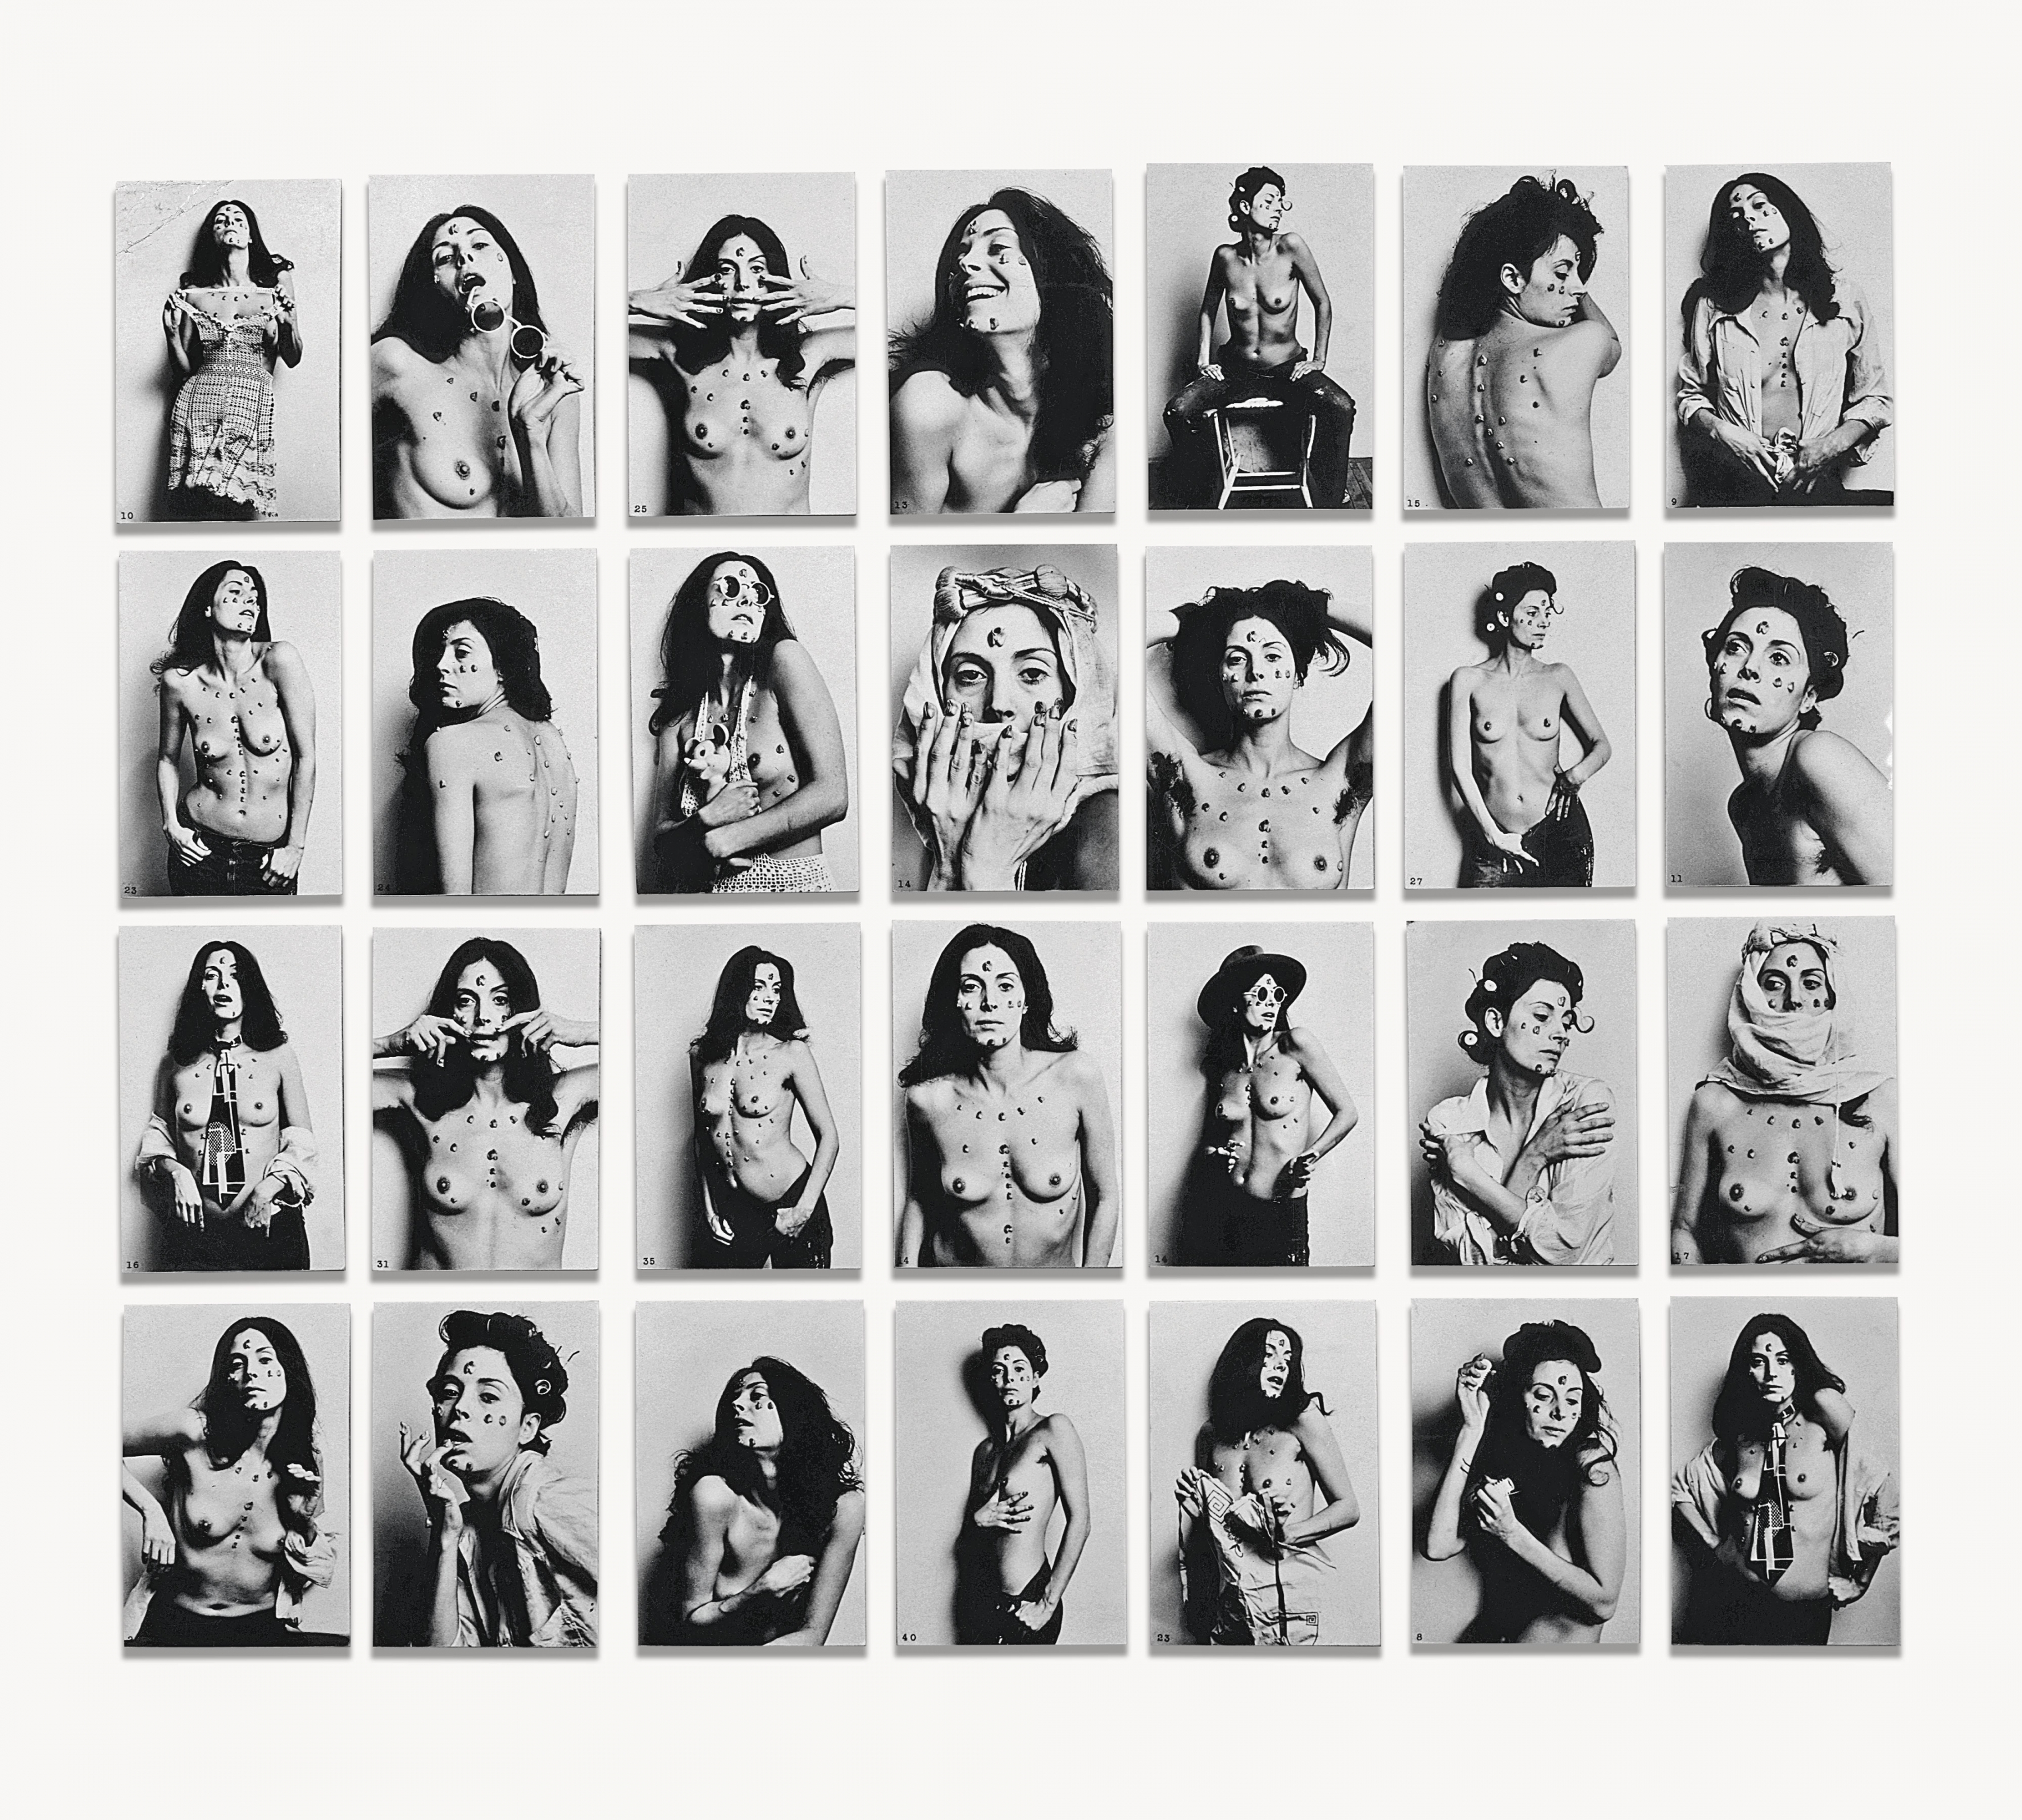 [FIG. 4]

Hannah Wilke

S.O.S. Starification Object Series, An Adult Game of Mastication, 1974 (detail)

Twenty-eight black and white photographs, 7 &times; 5 inches each (17.8 &times; 12.7 cm), framed together in installation of game box, photographs, and game instructions

Mus&eacute;e National d&rsquo;Art Moderne,

Centre Georges Pompidou, Paris

Gift of the Centre Pompidou Foundation, 2007 and partial gift of Marsie, Emanuelle, Damon and Andrew Scharlatt, Hannah Wilke Collection &amp; Archive, Los Angeles, to the Centre Pompidou Foundation, 2007.

Image courtesy Hannah Wilke Collection &amp; Archive,

Los Angeles.